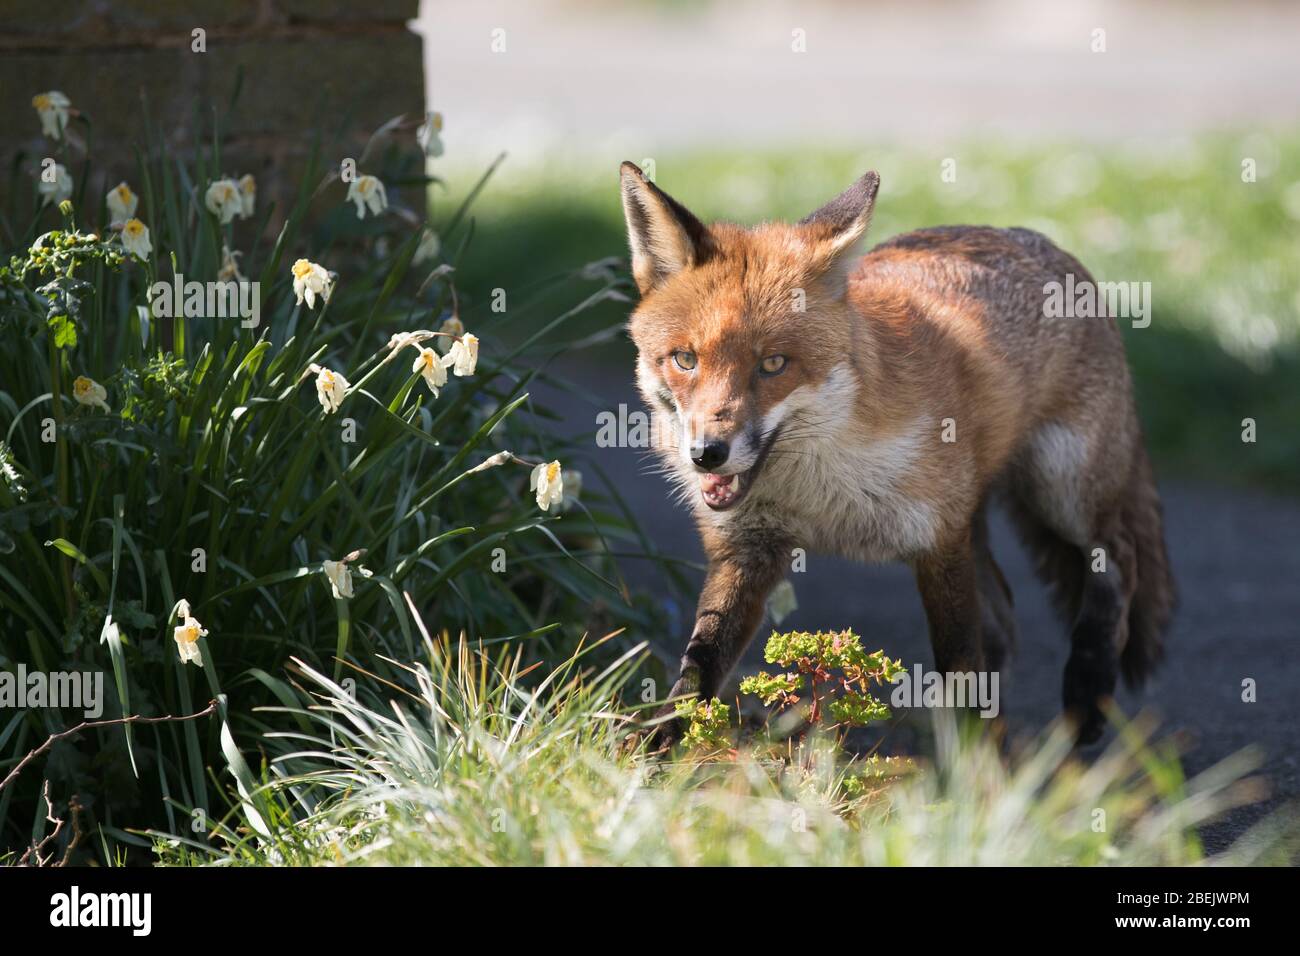 A fox patrols the streets of Brentwood, Essex, UK. Foxes are now common in urban areas in the United Kingdom. Stock Photo